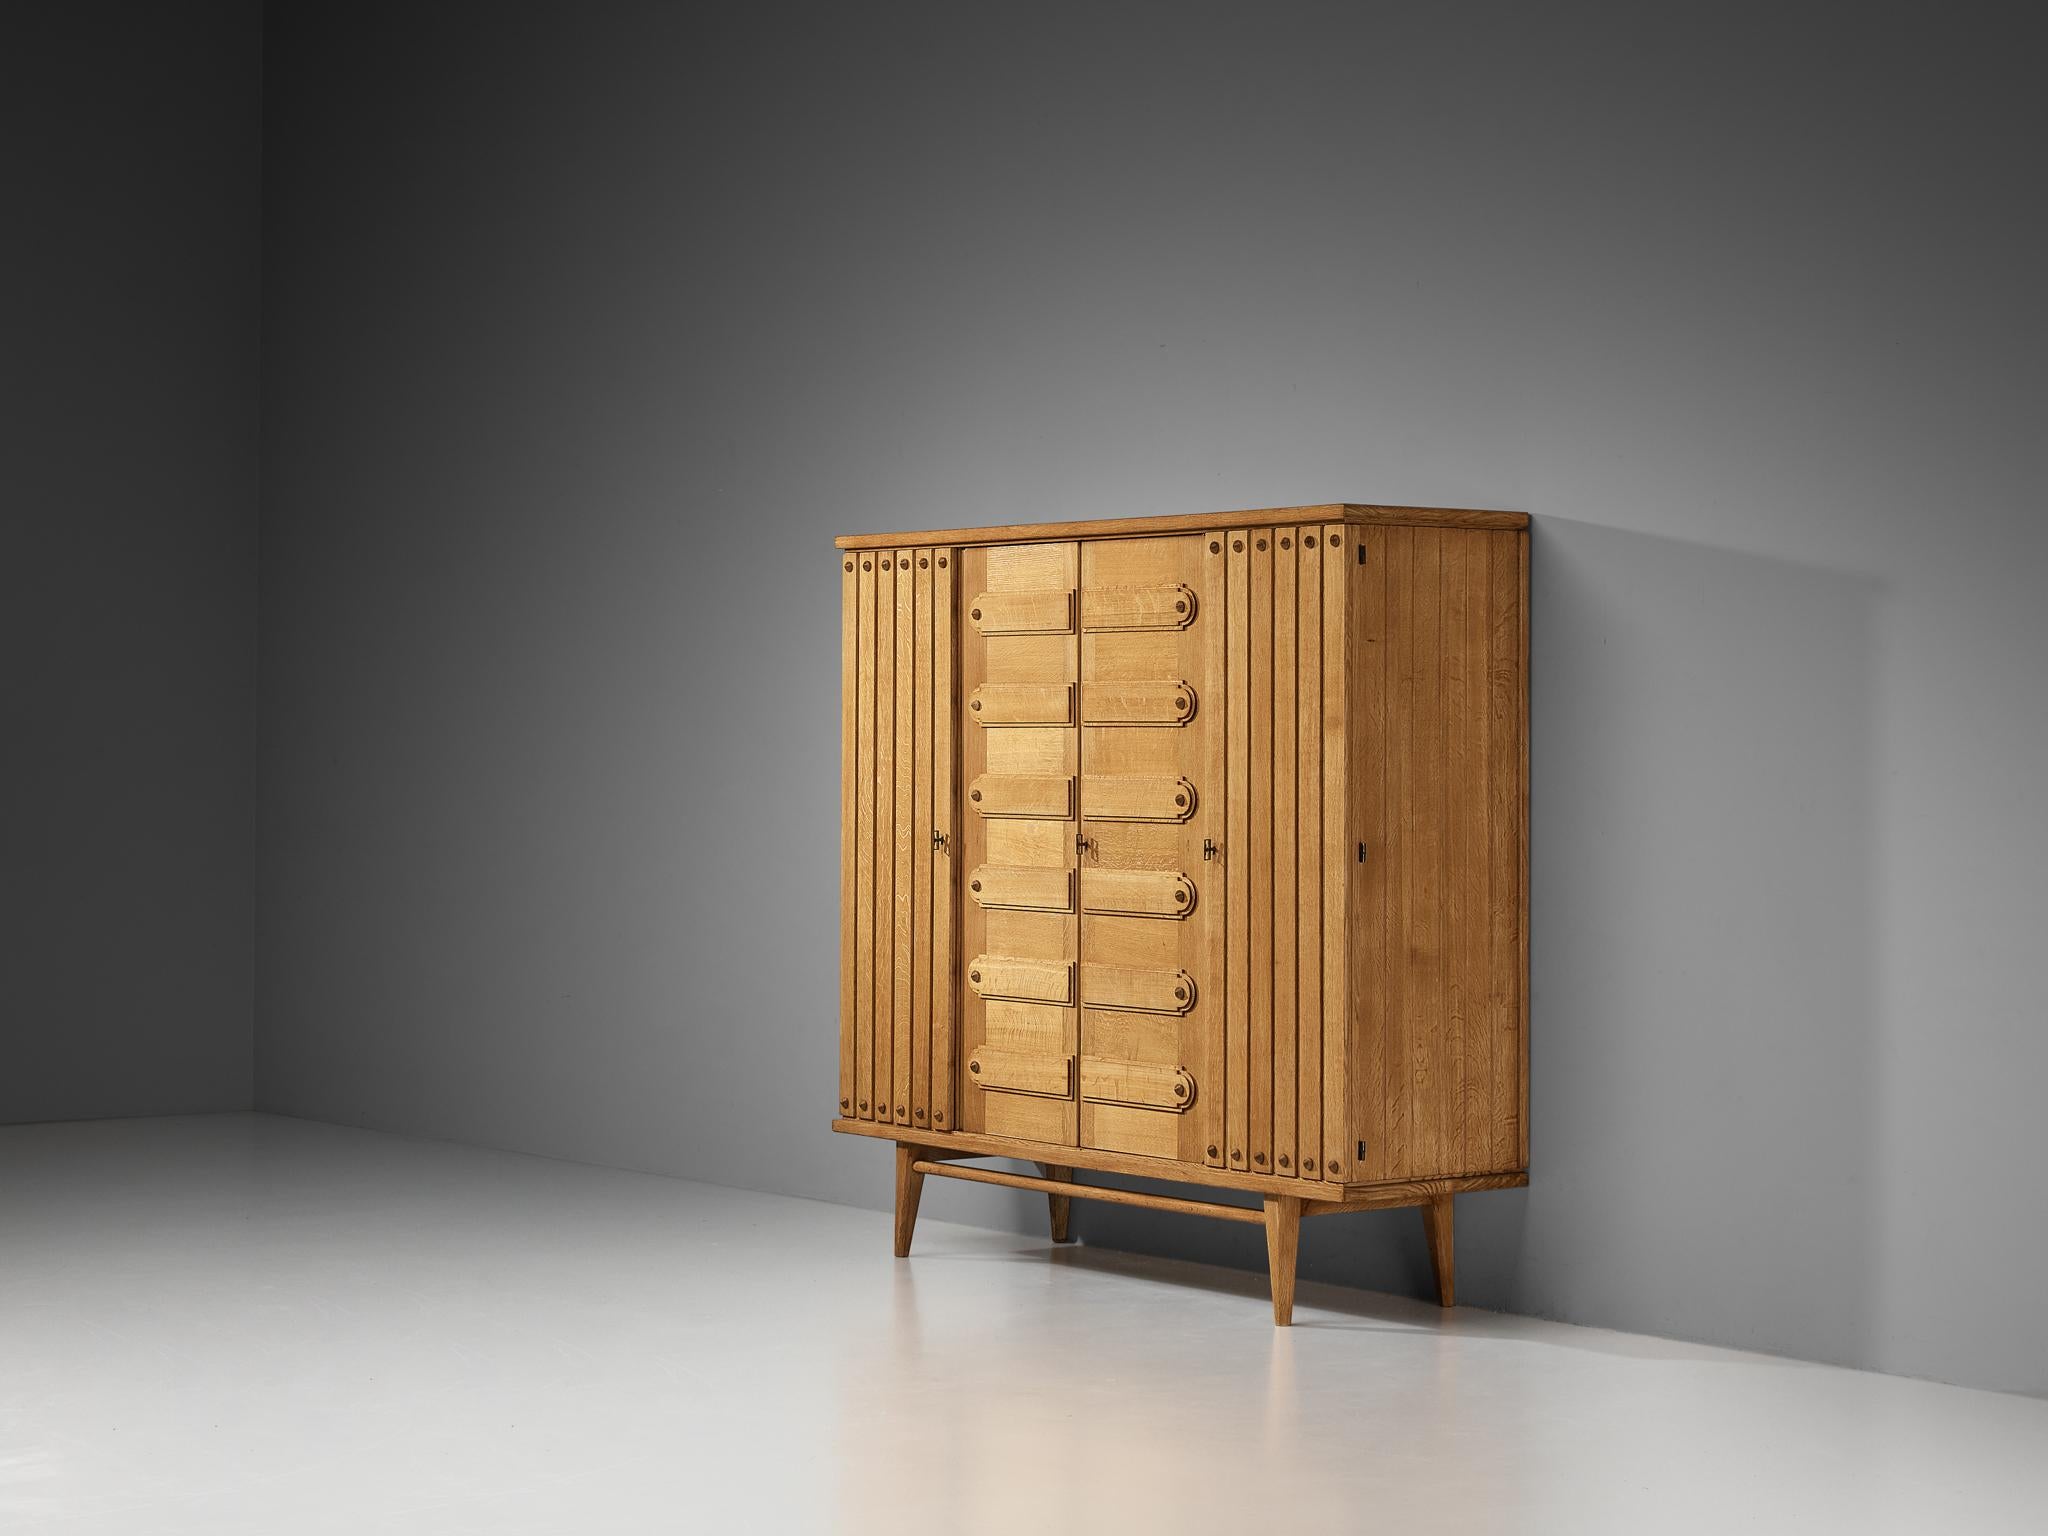 Vanity, high board or armoire, brass, France, 1960s

French large cabinet or wardrobe made in oak with beautiful grain and detailing. With the vividly designed fronts and the functional and versatile storage facilities this high-quality piece of